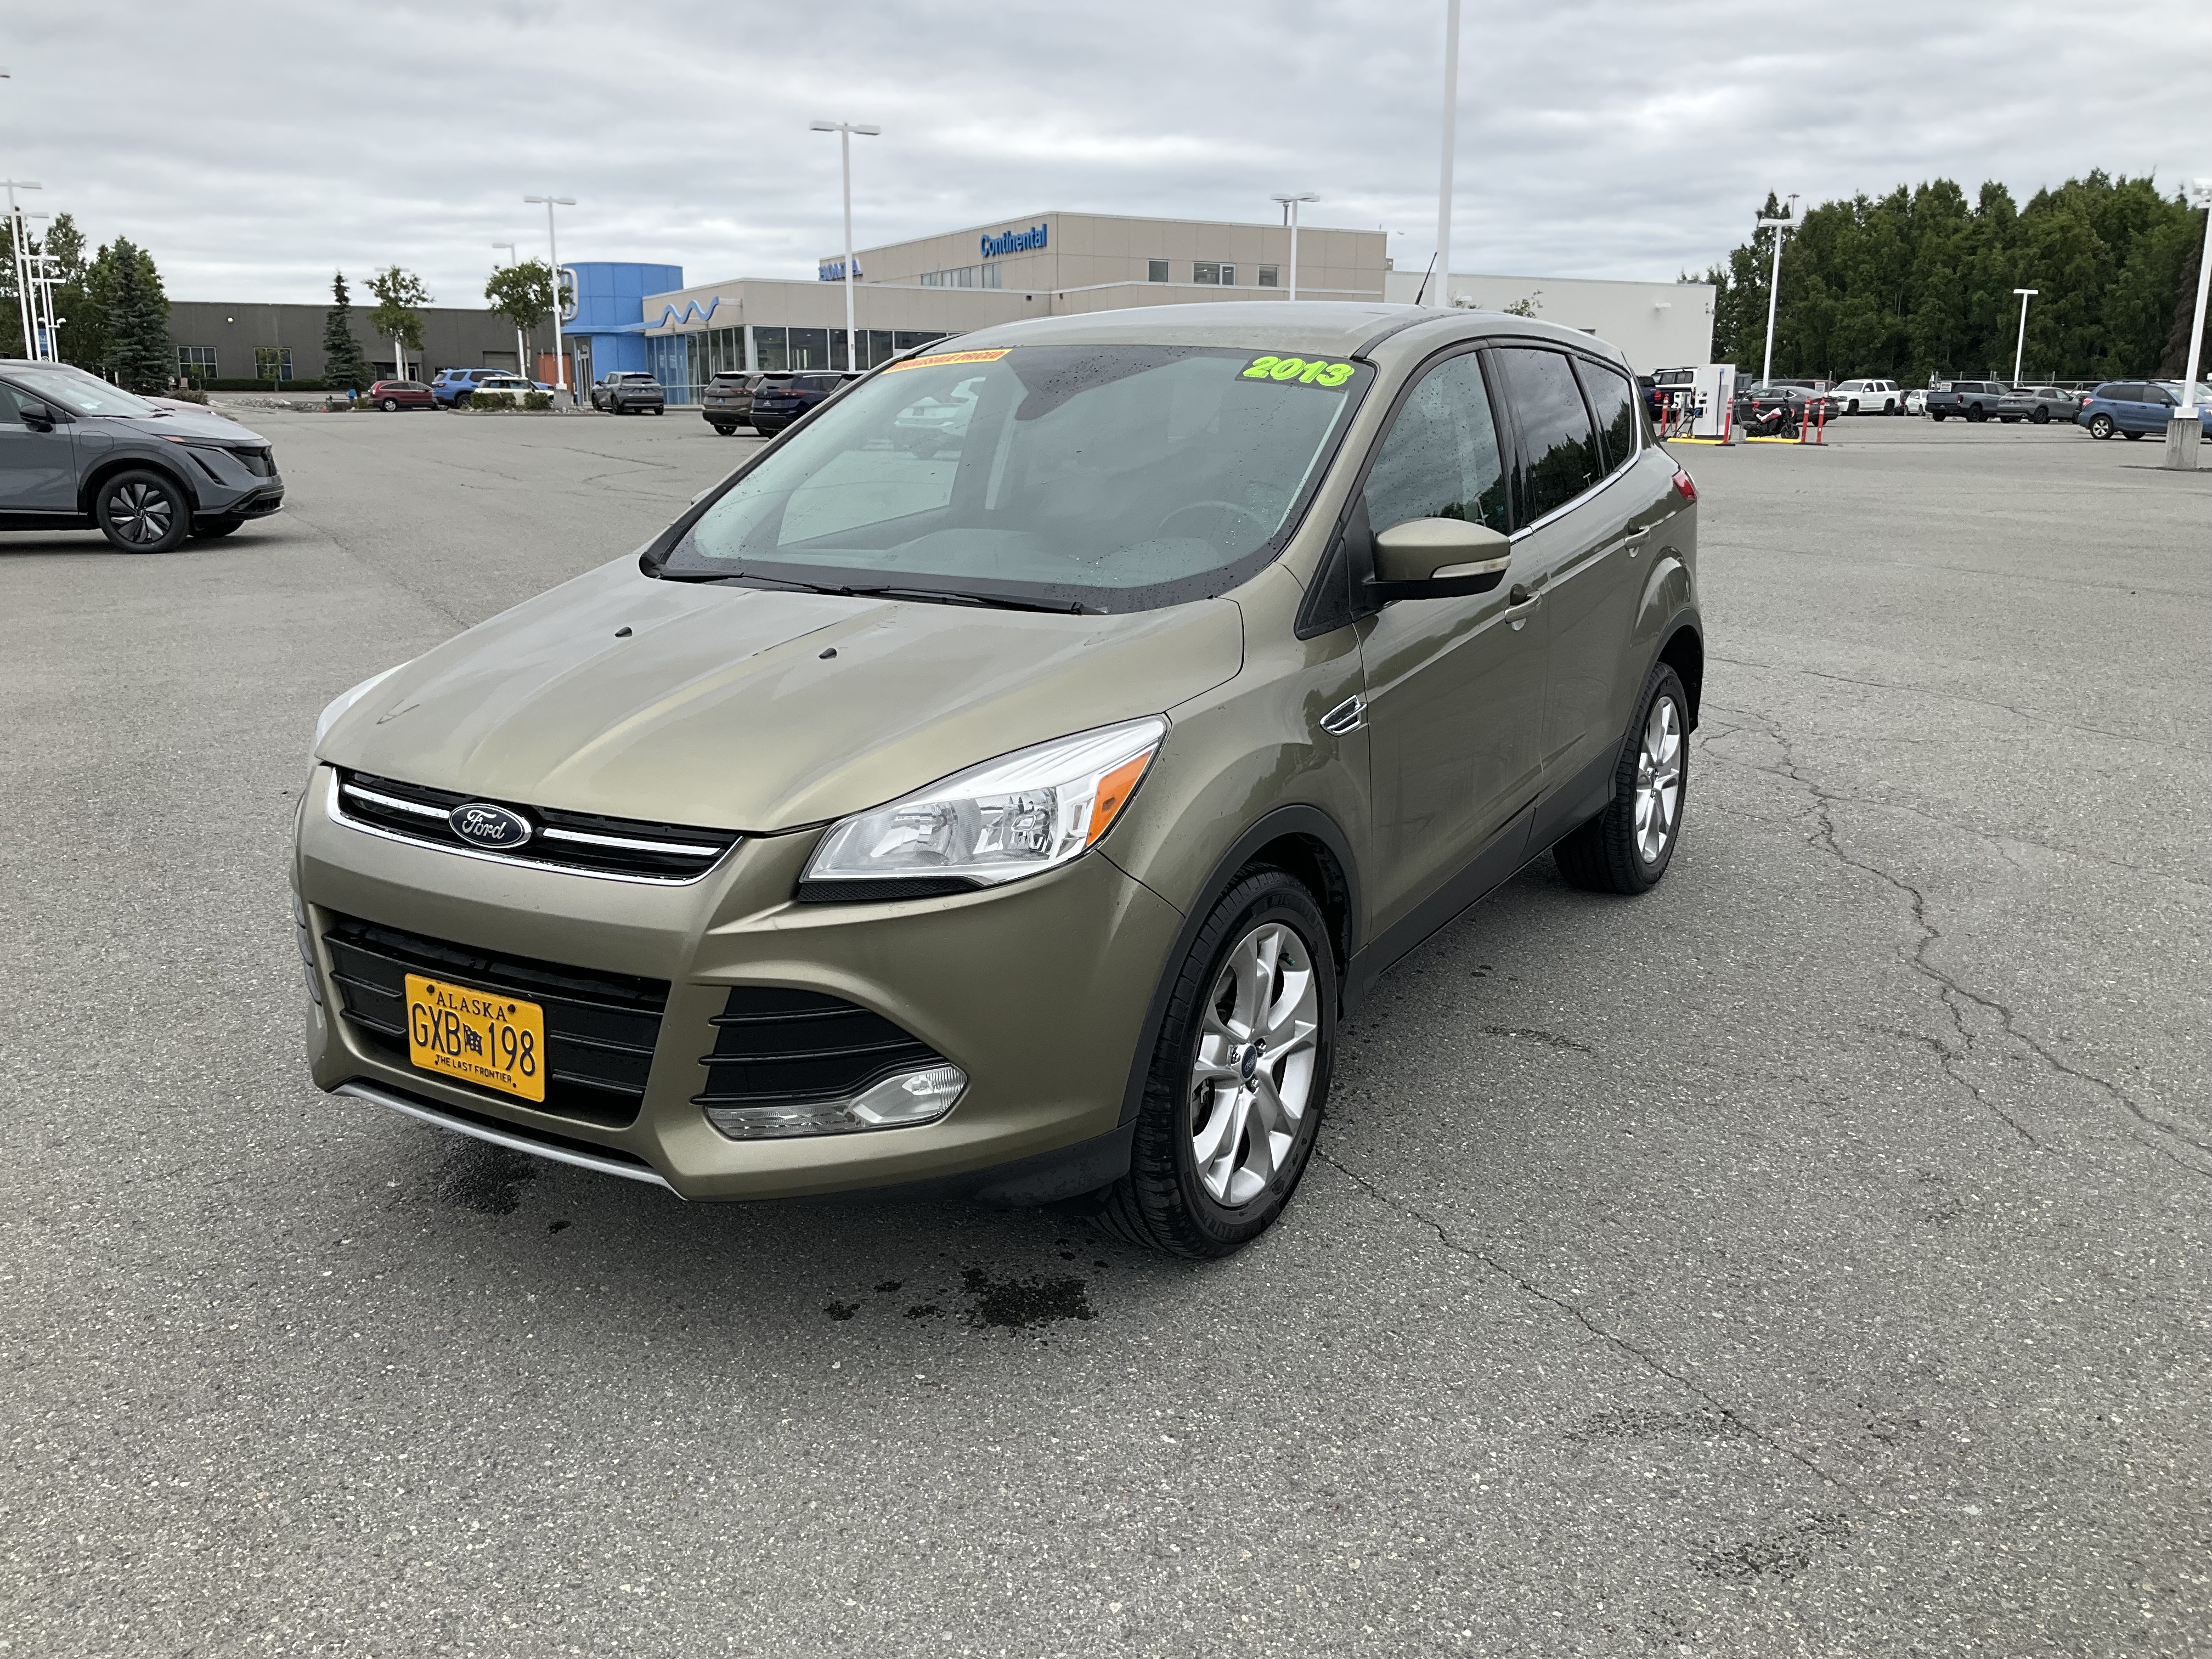 Used 2013 Ford Escape SEL with VIN 1FMCU9H93DUB86054 for sale in Anchorage, AK